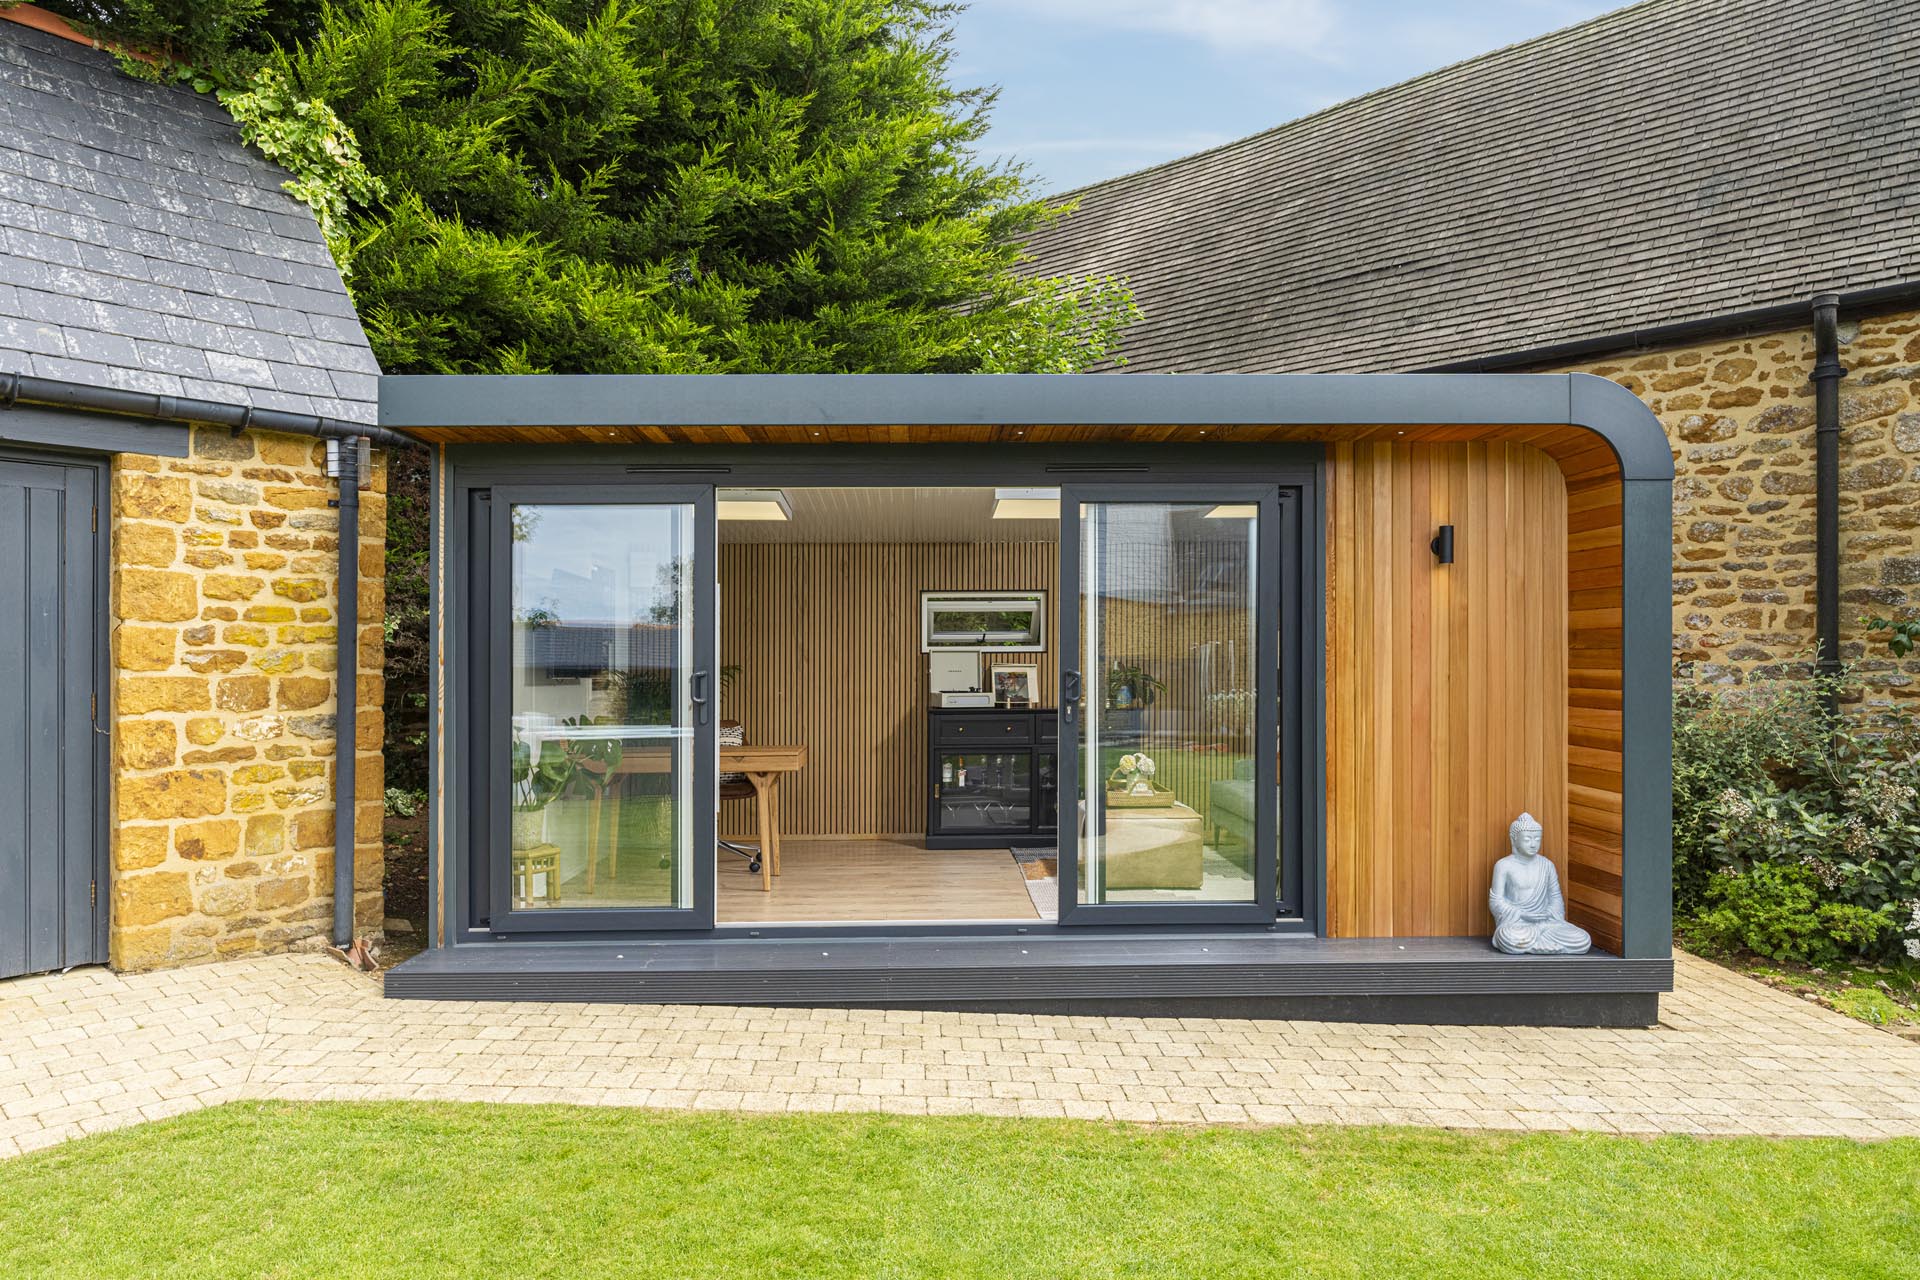 Front view of cedar clad garden room with sliding doors open to show wooden slatted wall and interior being used as office and lounge